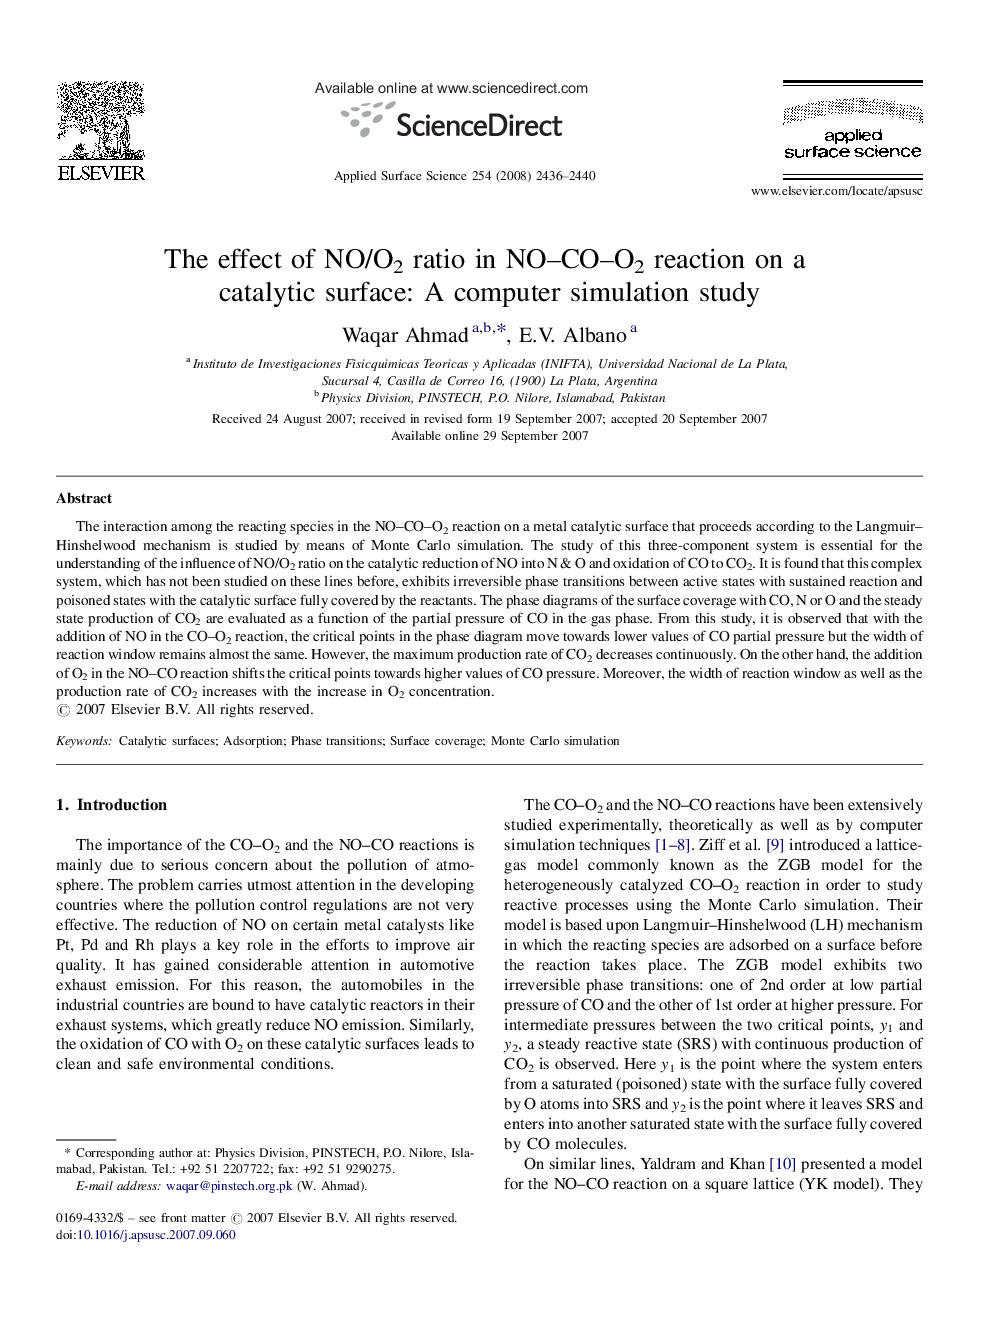 The effect of NO/O2 ratio in NO-CO-O2 reaction on a catalytic surface: A computer simulation study